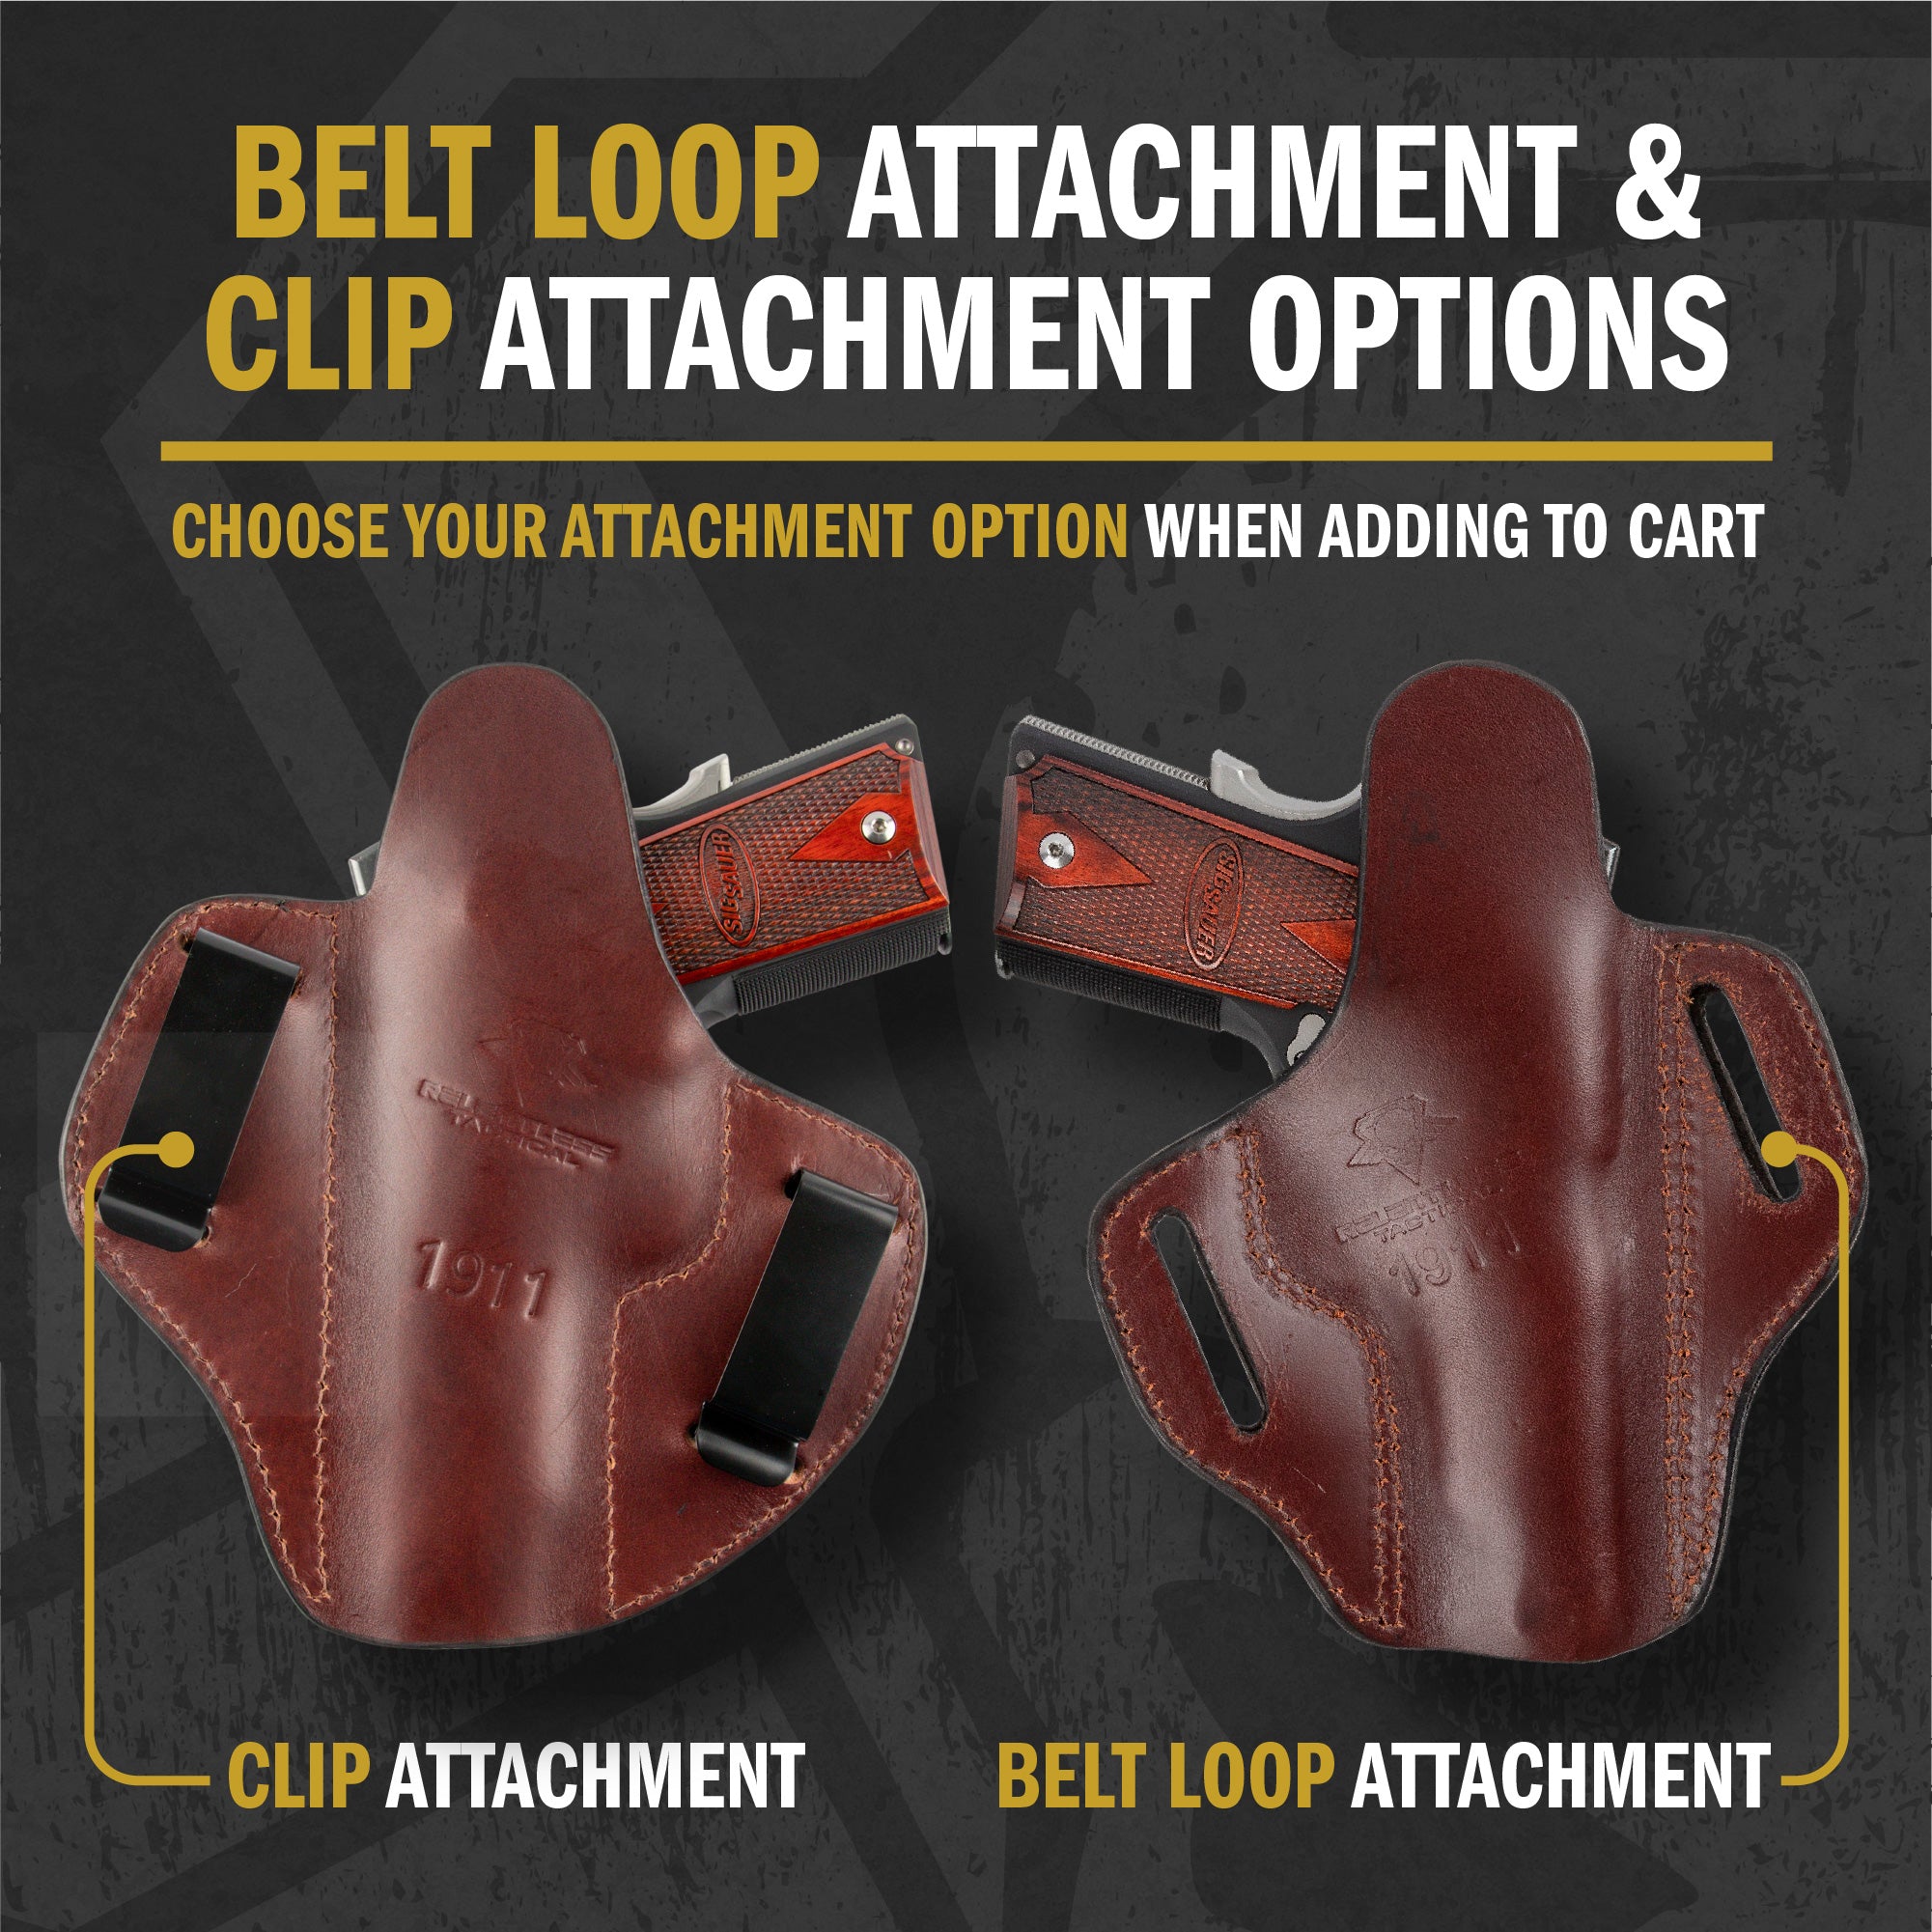 The Ultimate 3 Slot OWB Leather Gun Holster